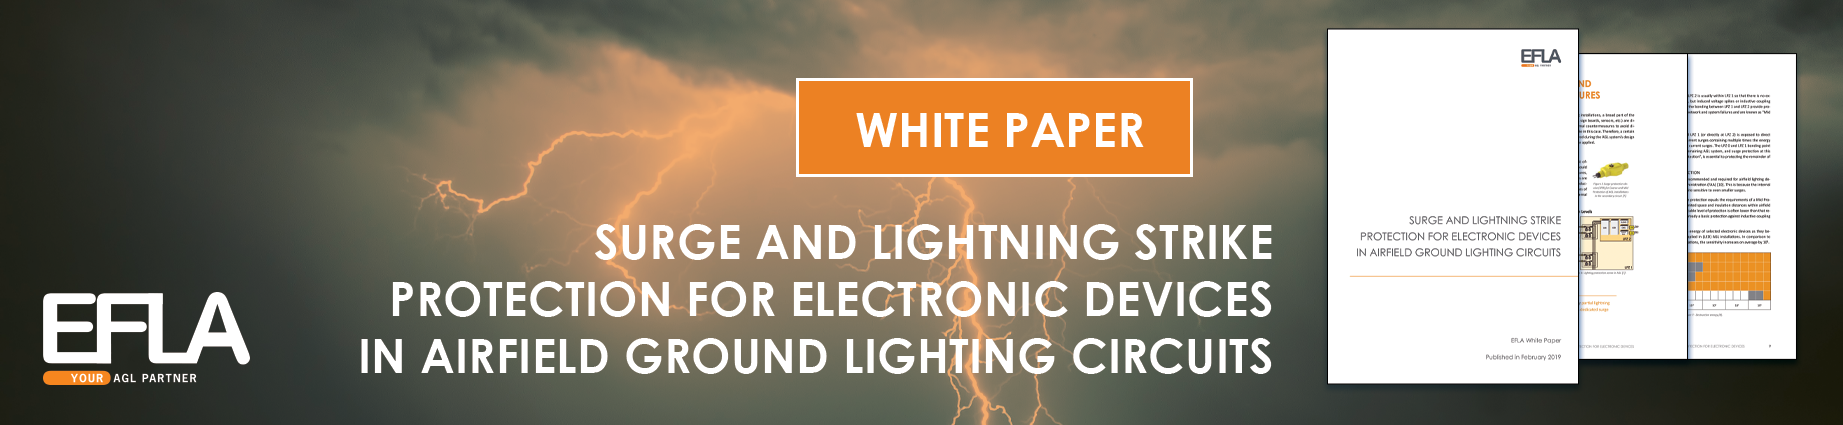 White paper on surge and lightning strike protection for electronic devices in airfield ground lighting circuits